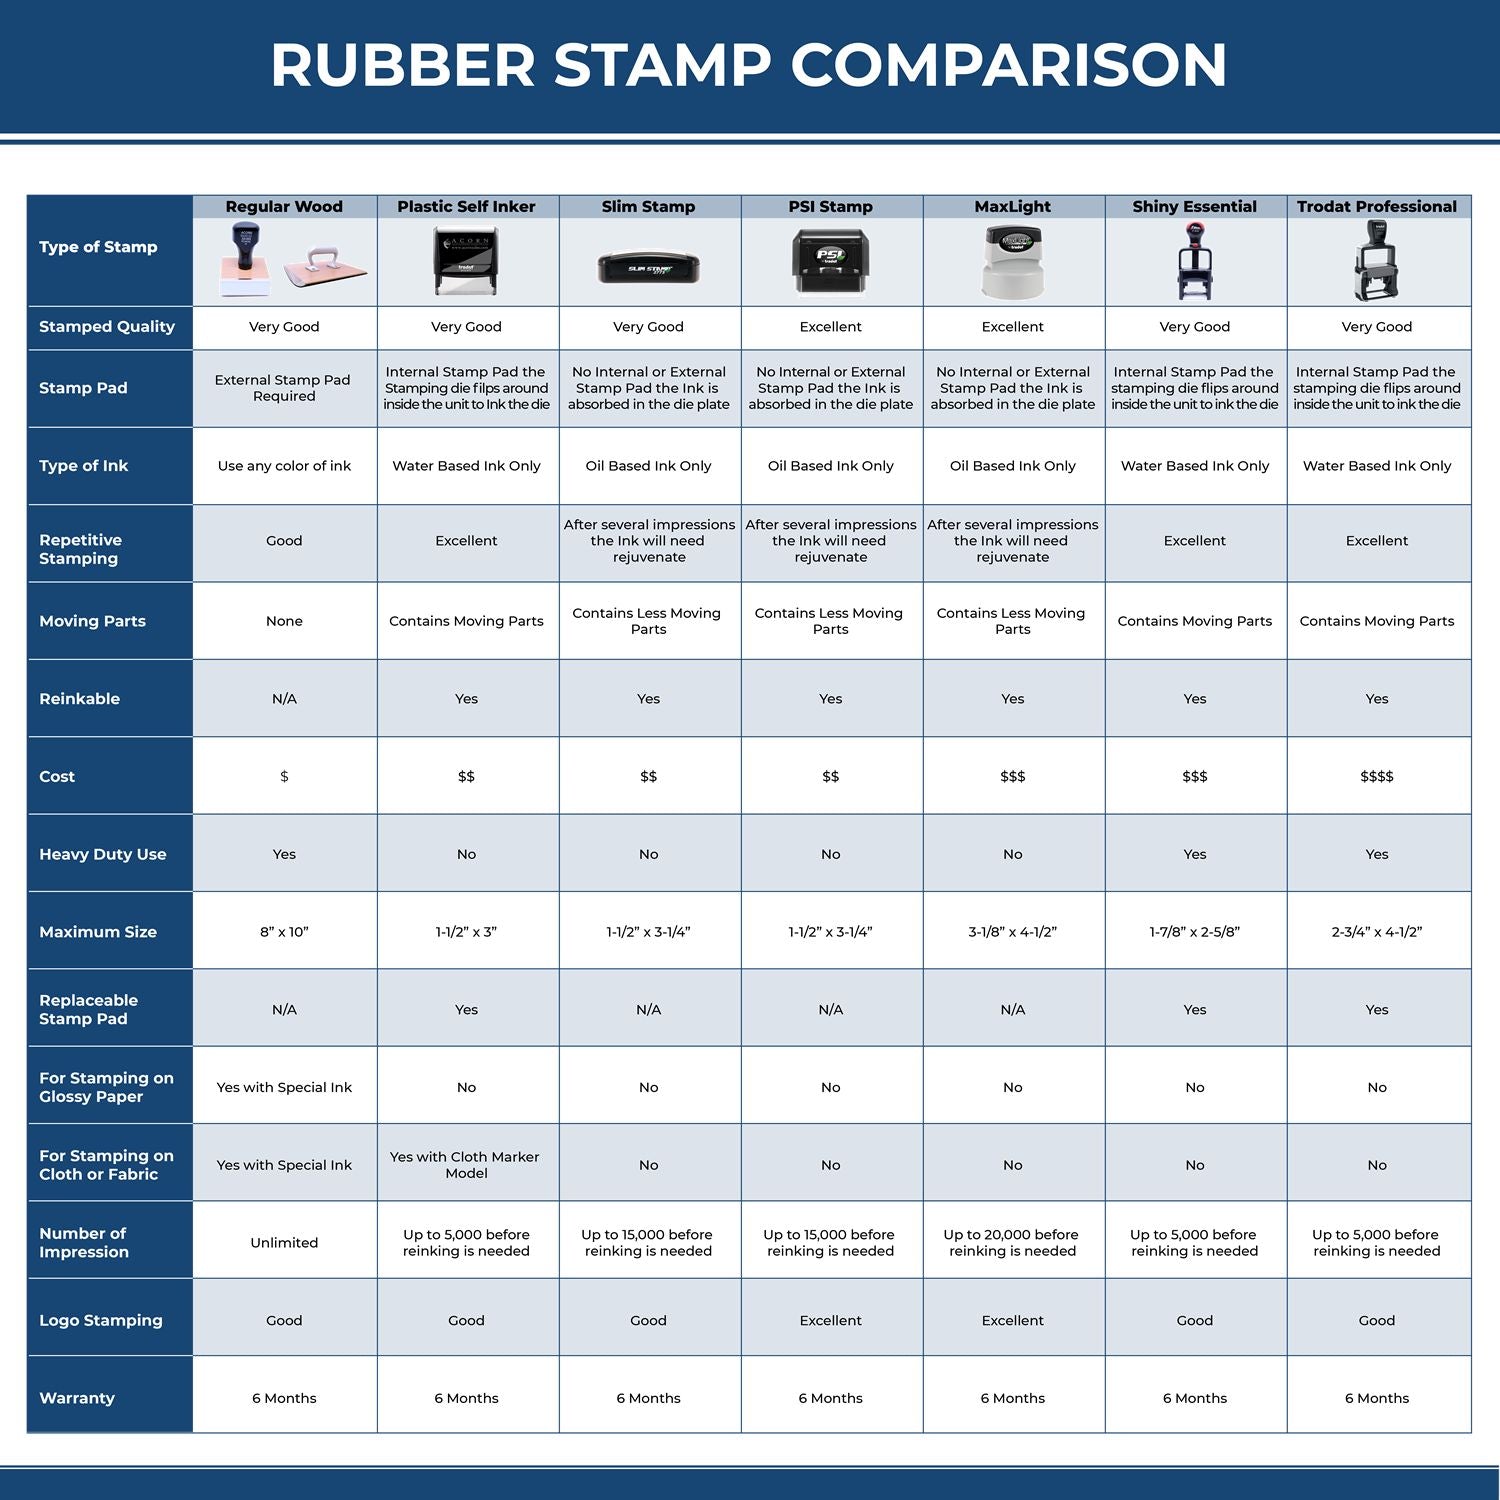 A comparison chart for the different types of mount models available for the Premium MaxLight Pre-Inked Michigan Landscape Architectural Stamp.